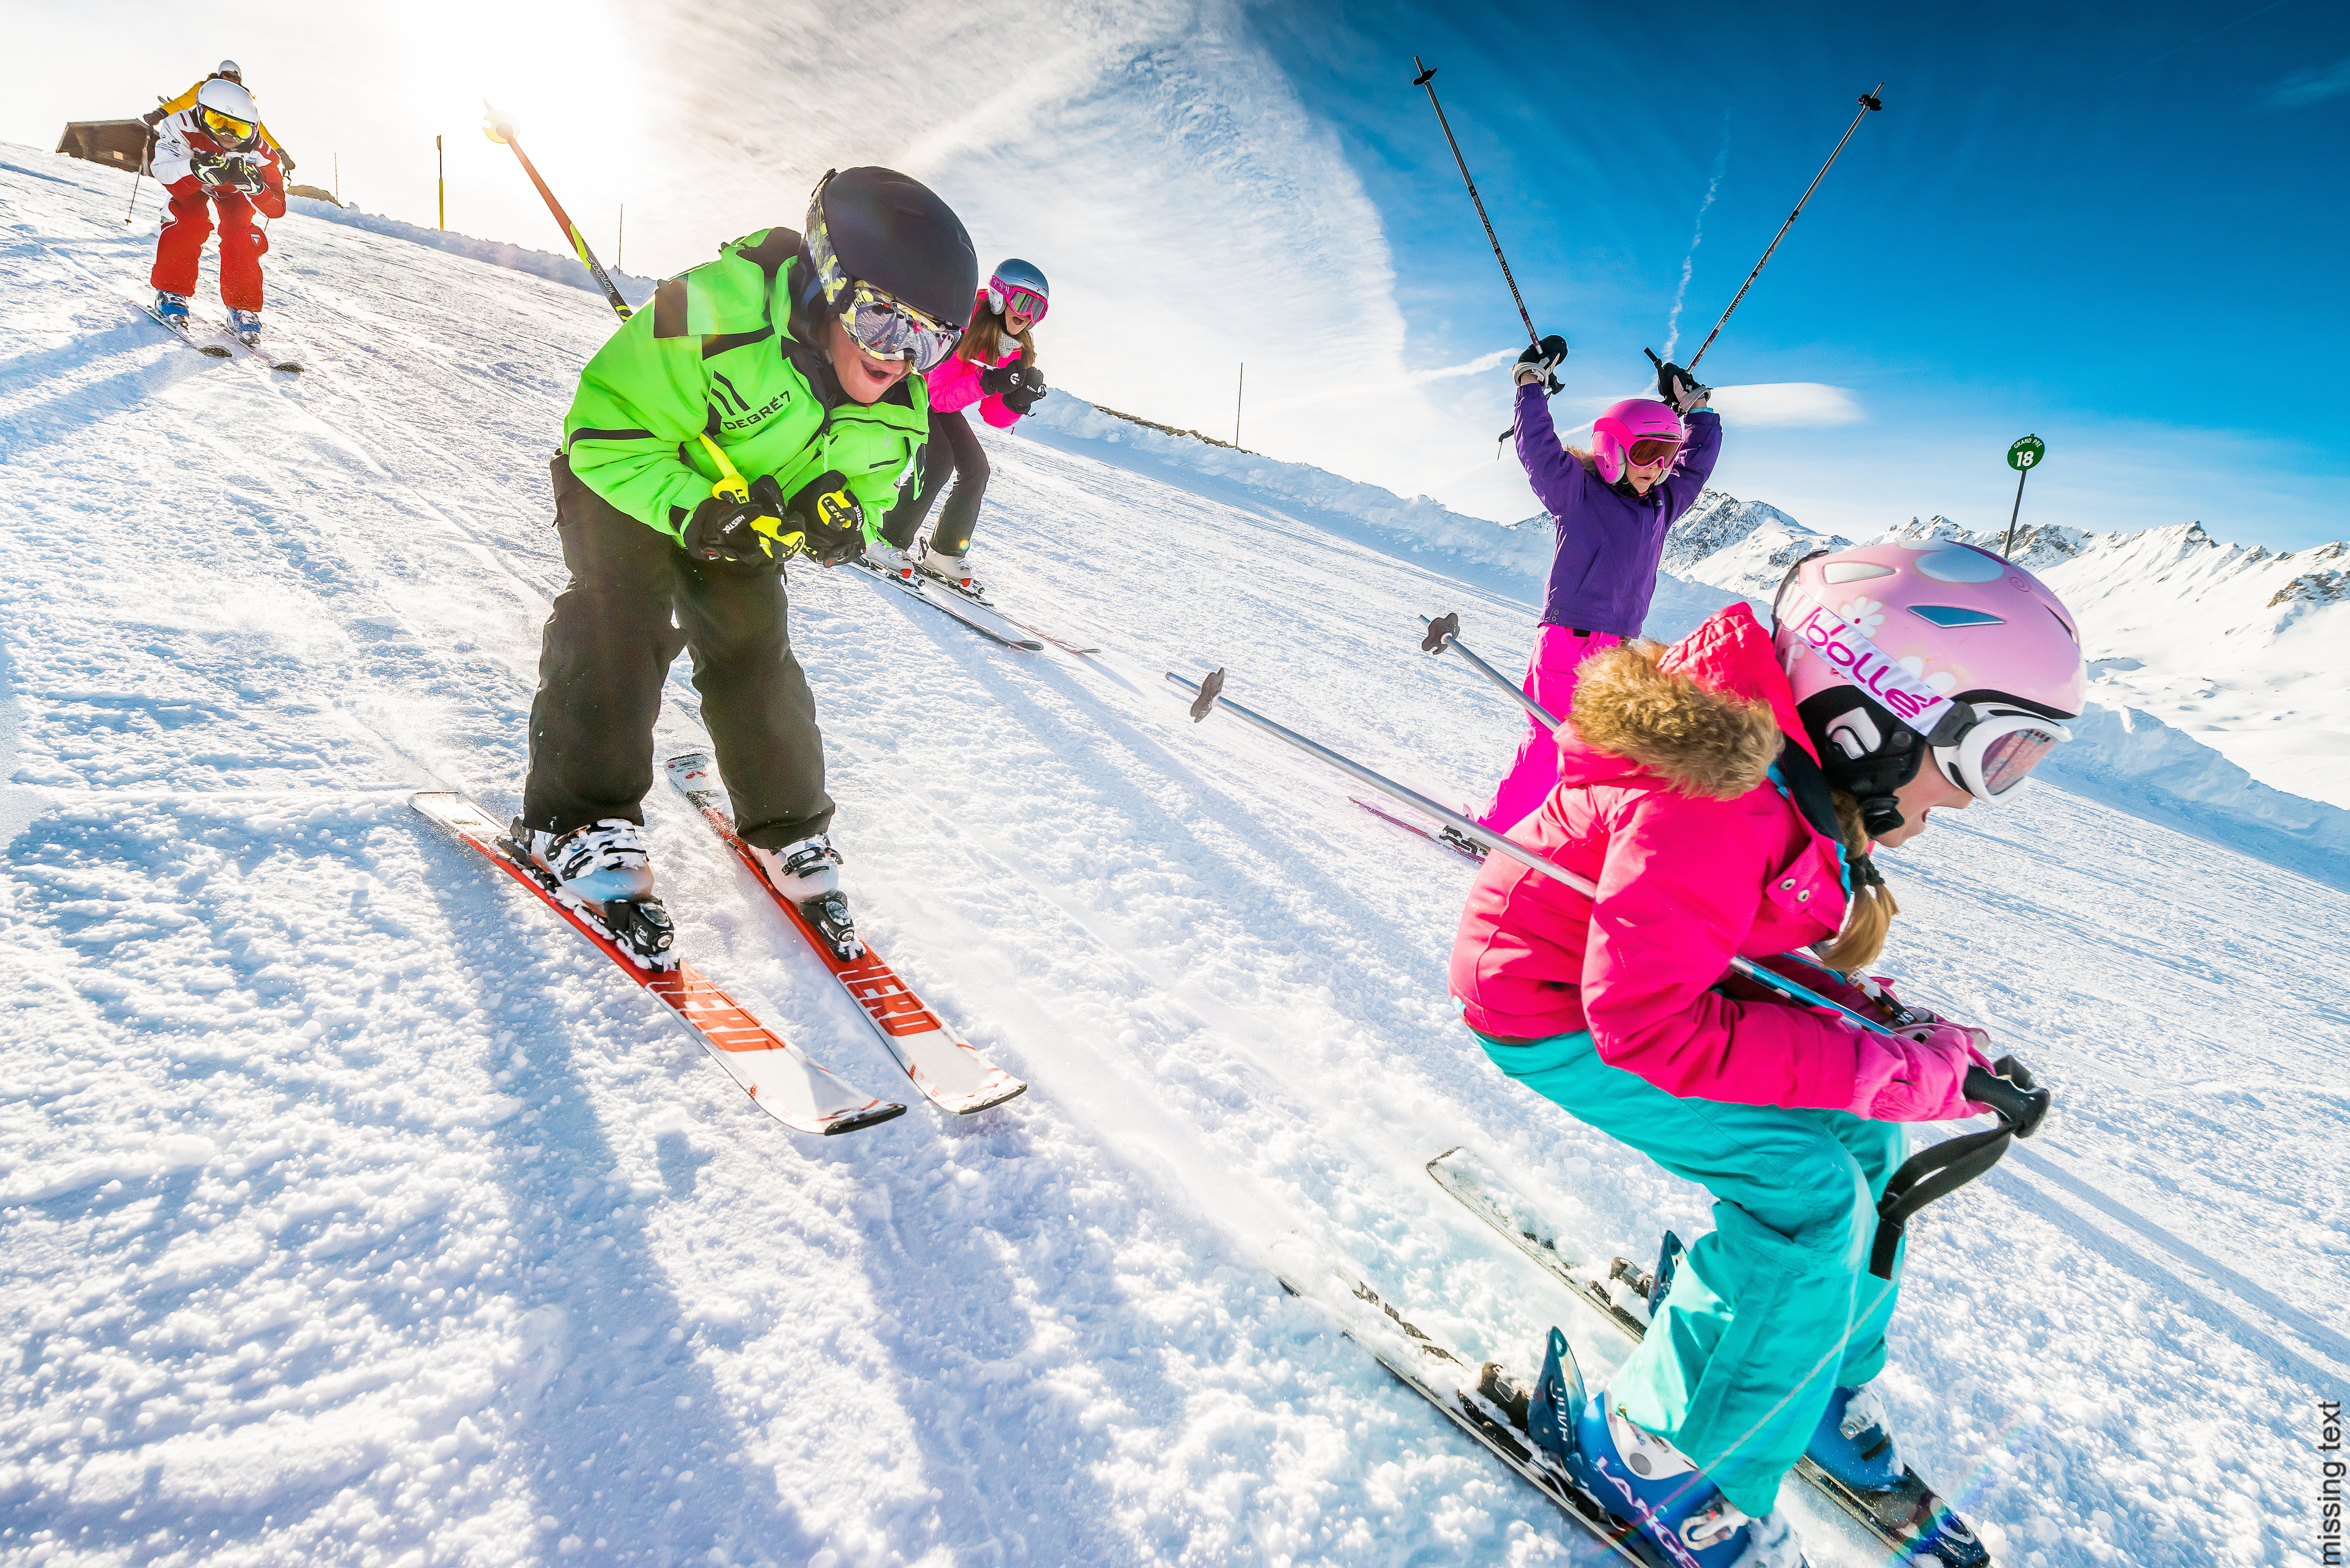 When to take the children skiing